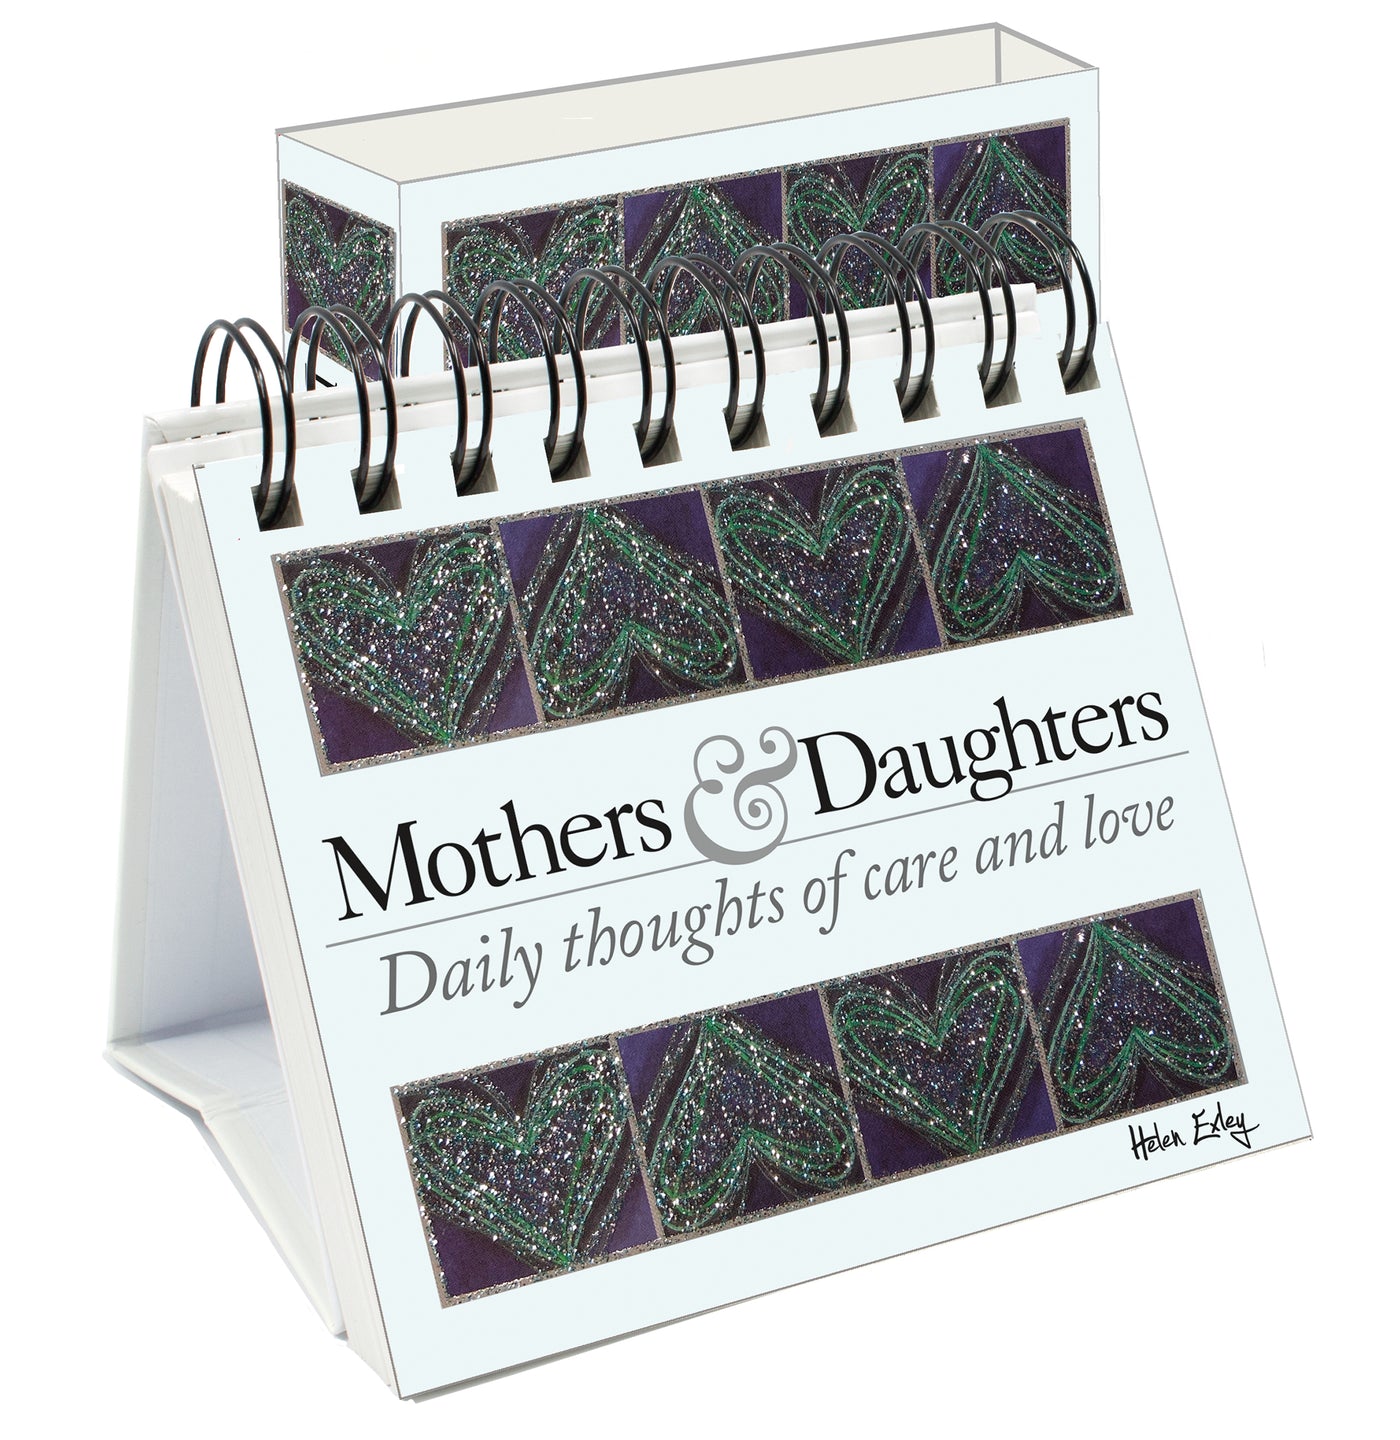 365 Mothers and Daughters - Daily thoughts of care and love